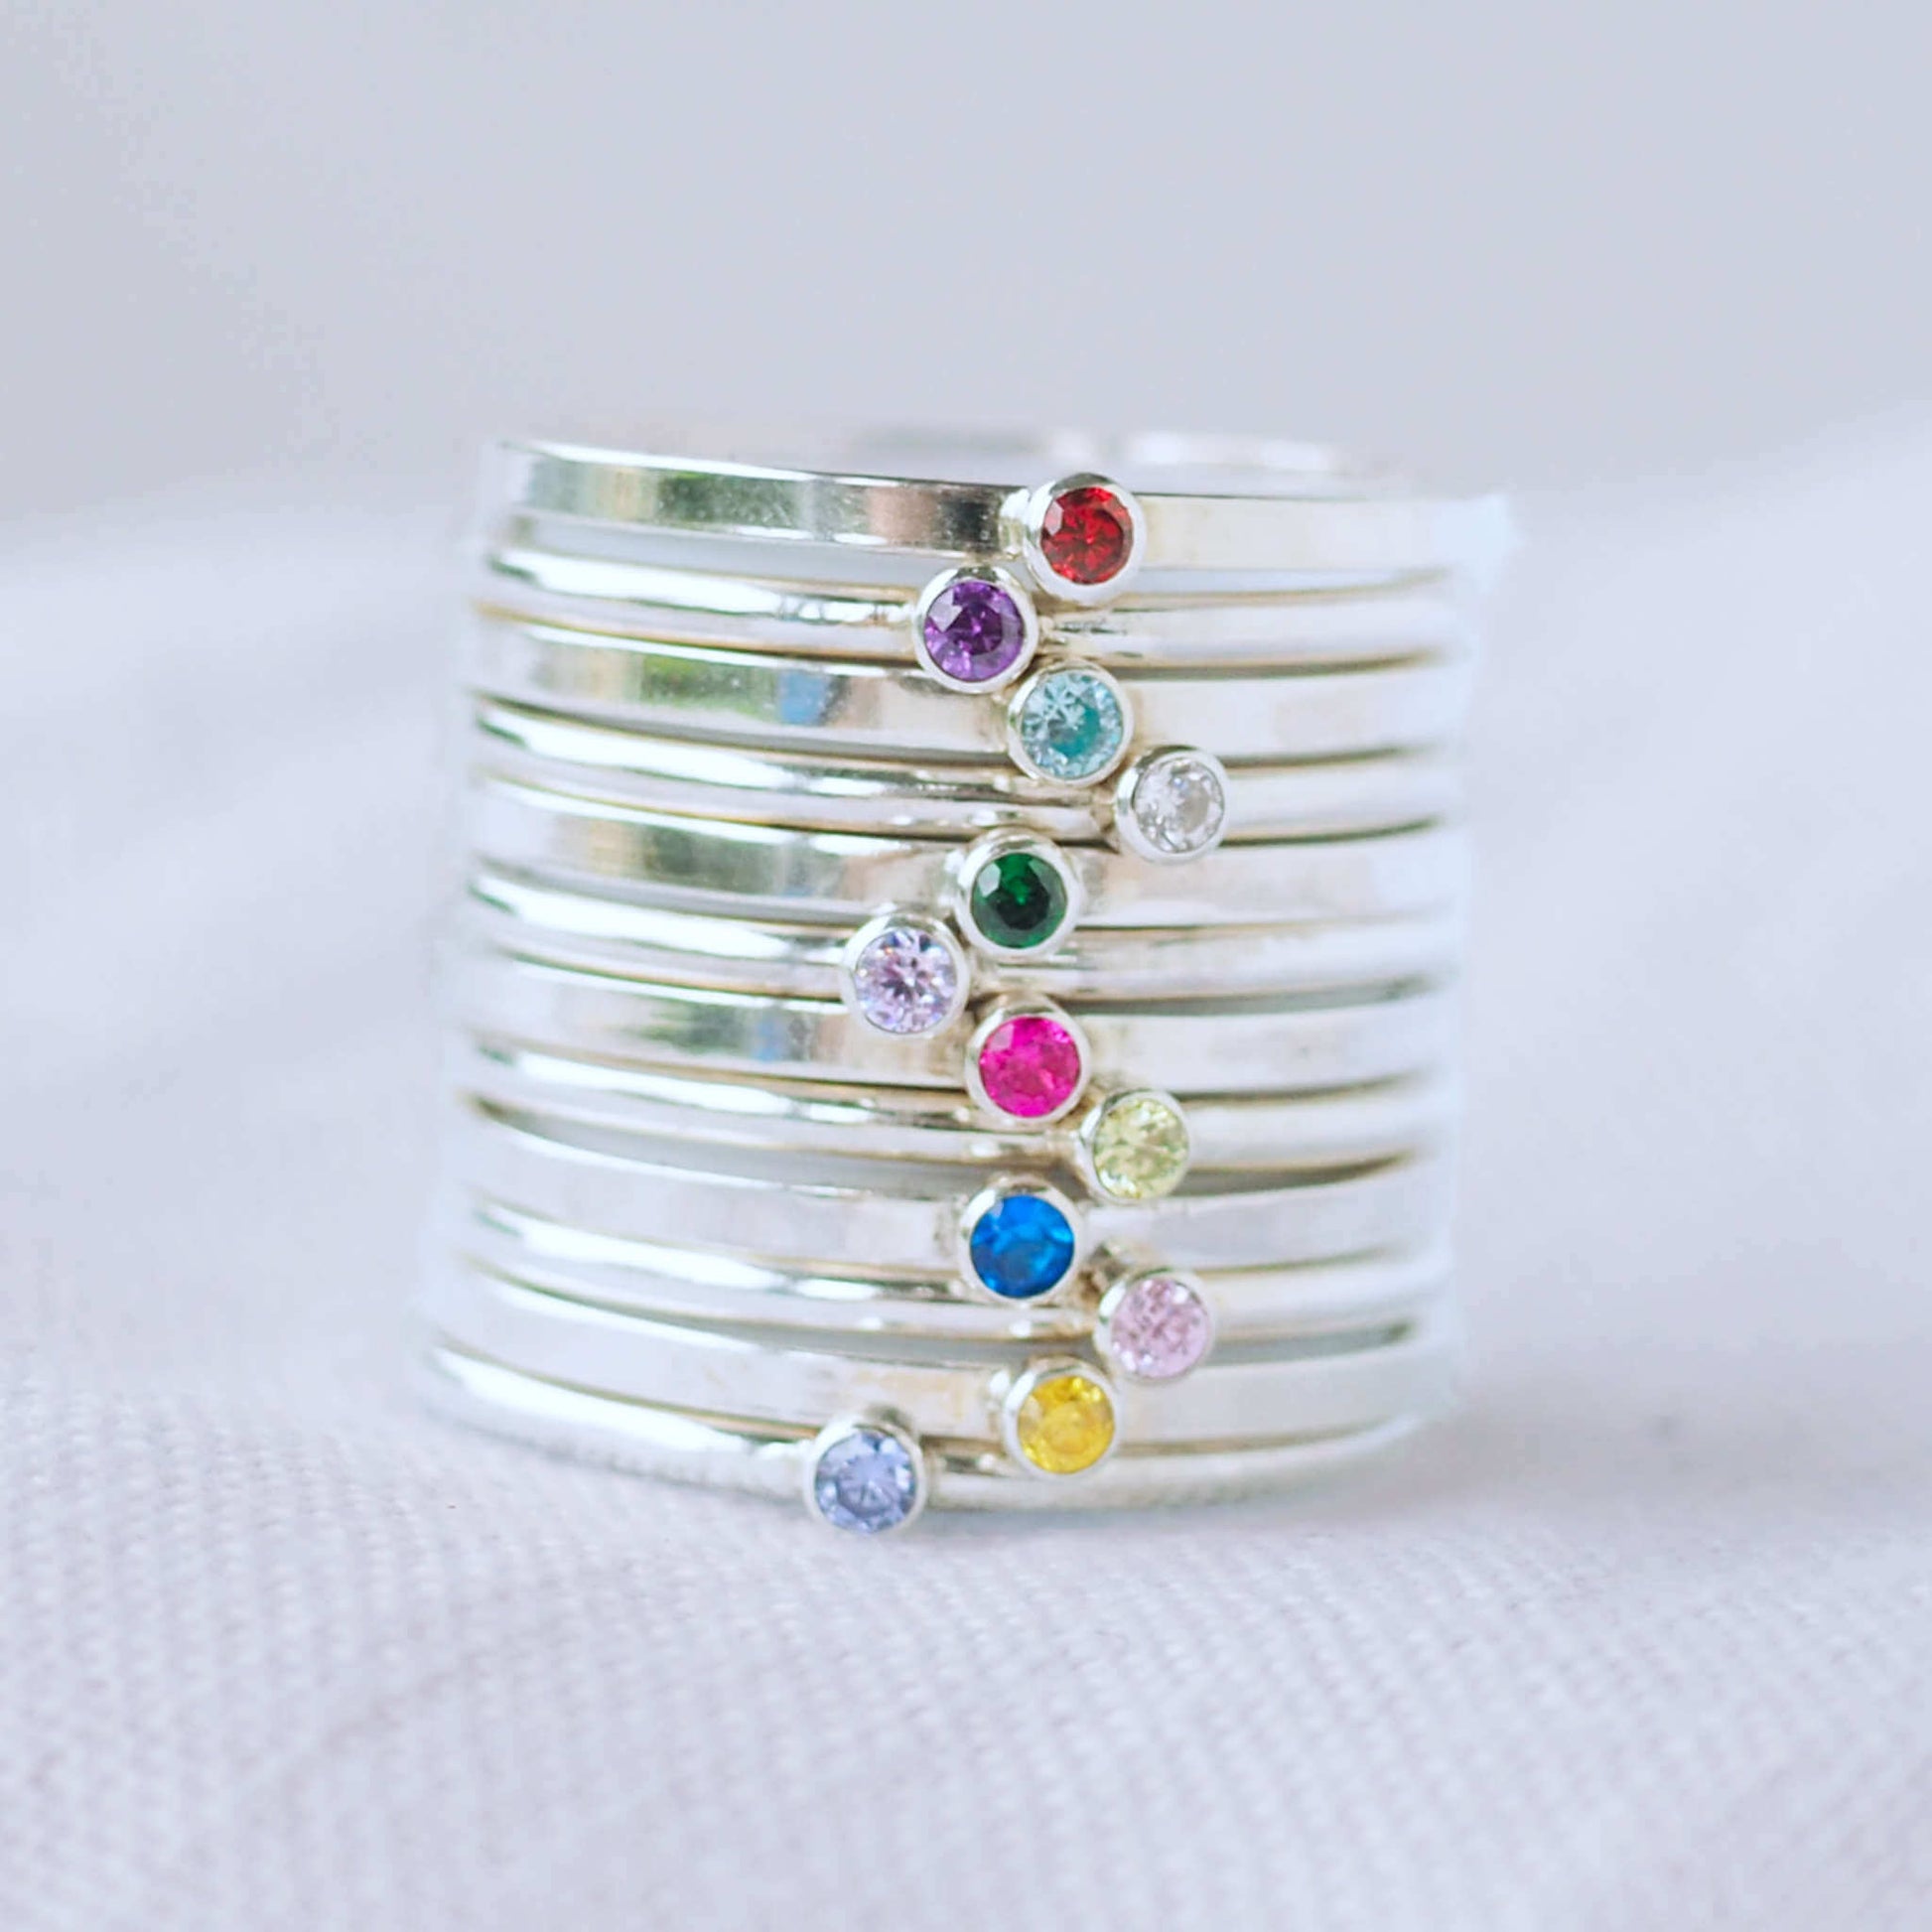 Stack of twelve birthstone rings in Sterling Silver with a round coloured cubic zirconia in 2 mm size to mark birthstones for every month. Rainbow bright coloured gems with round or square silver bands to create a modern minimalist gemstone ring. Handmade in Scotland by maram jewellery